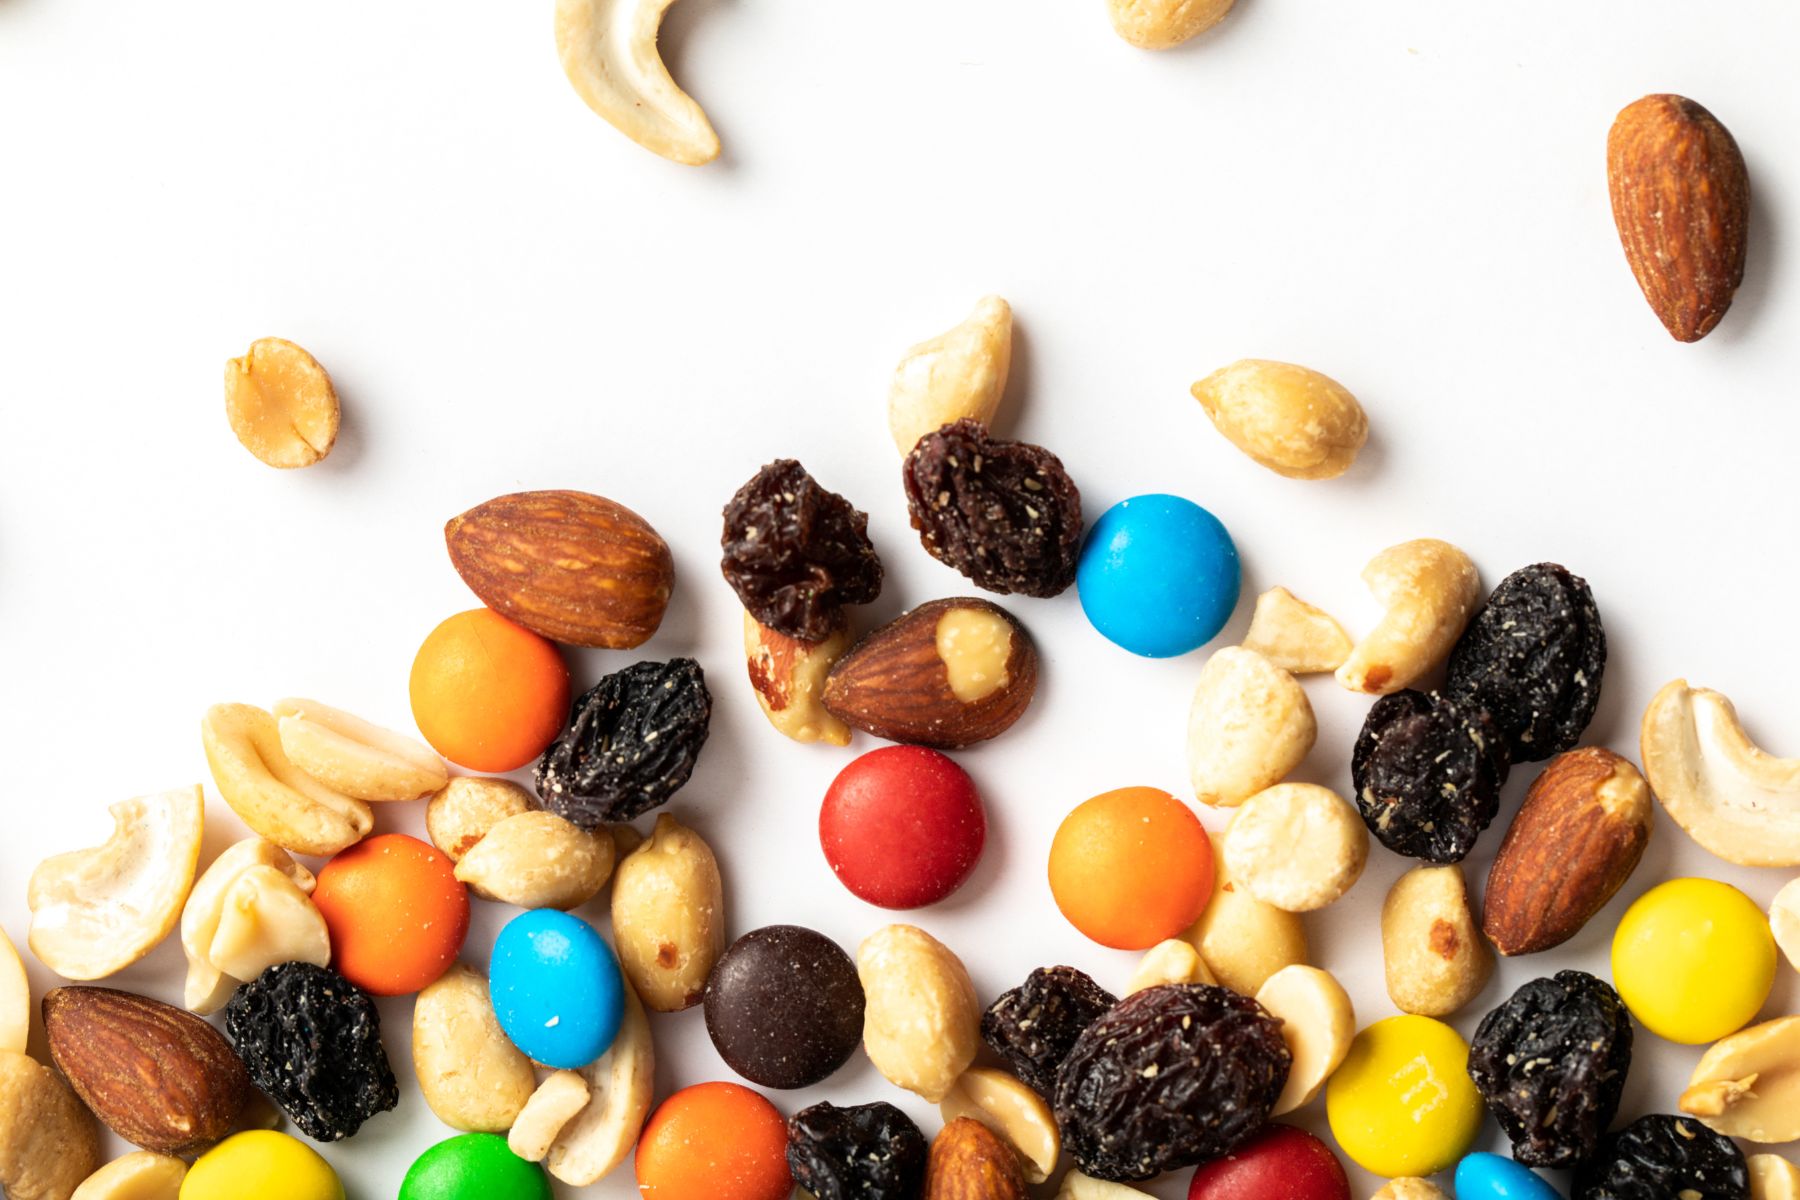 The Trail Mix